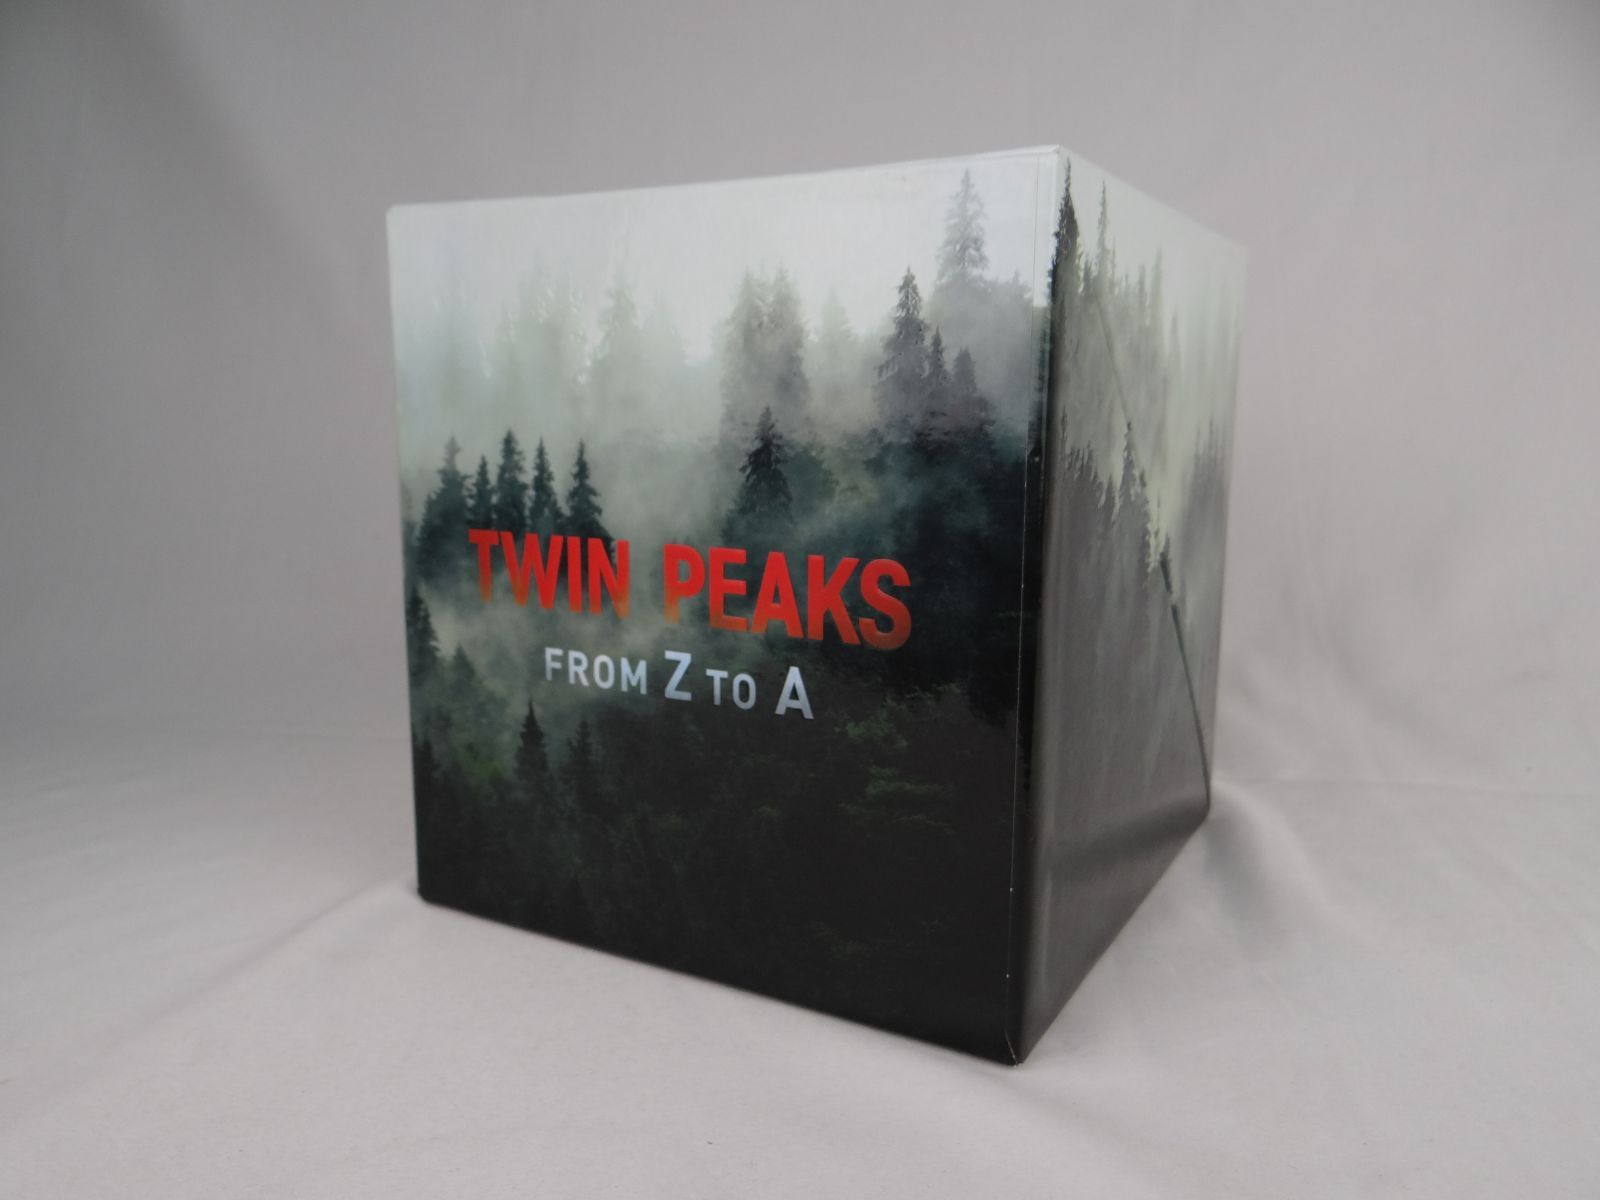 TWIN PEAKS ツイン・ピークス from Z to A Blu-ray BOX 【Amazon.co.jp